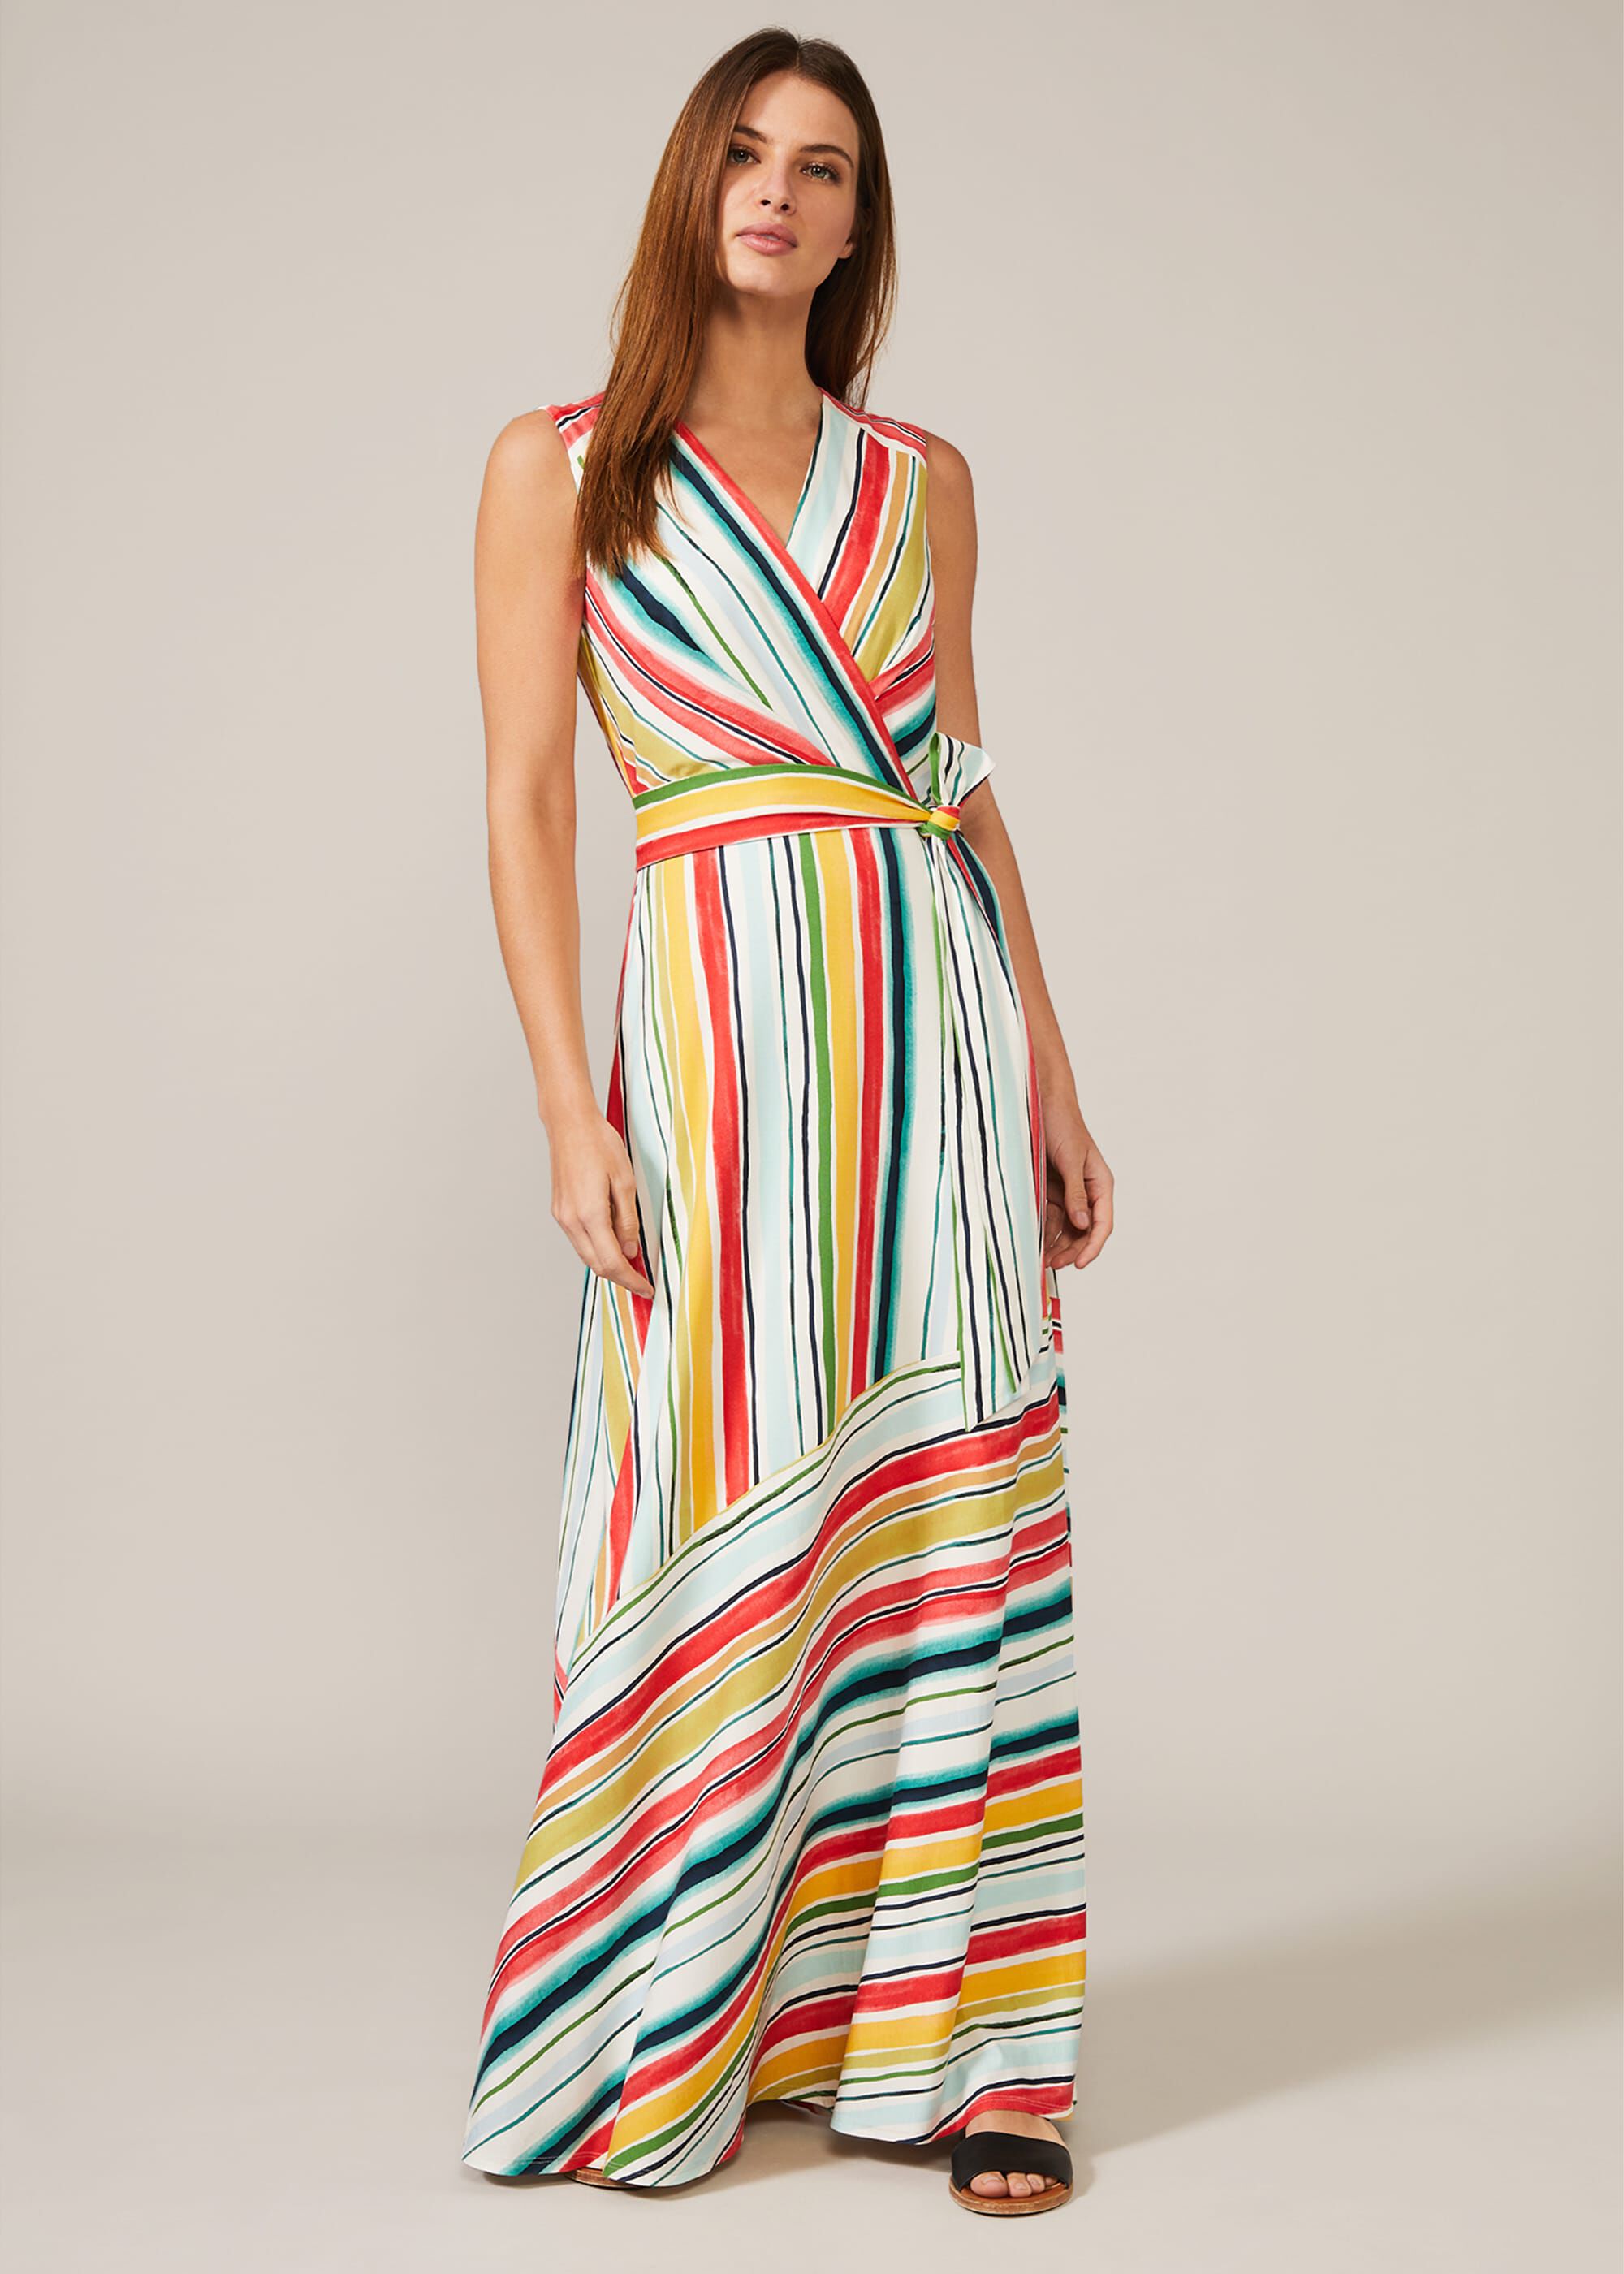 Phase Eight Maxi Deals, 59% OFF | www.aluviondecascante.com